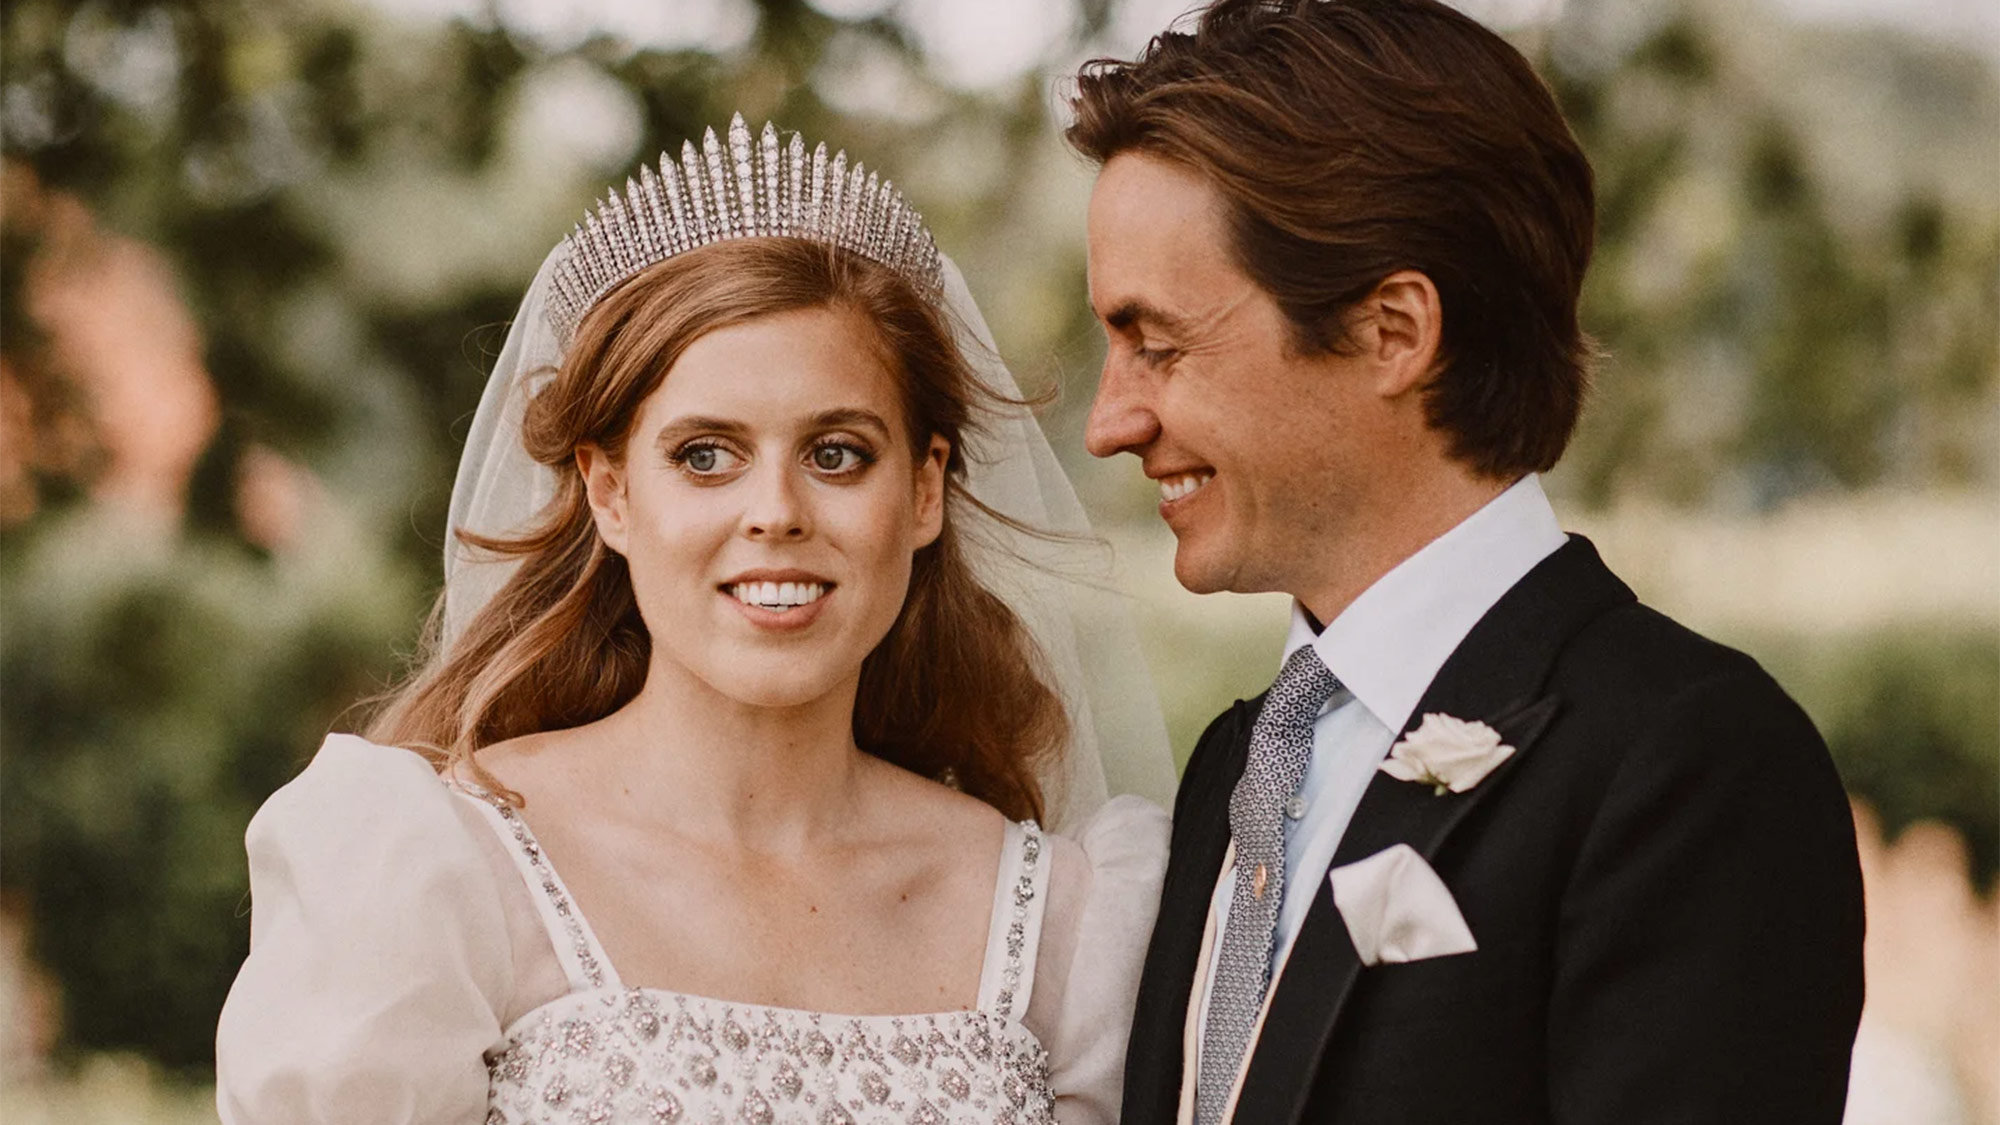 Here’s how you can see Princess Beatrice’s wedding dress for real